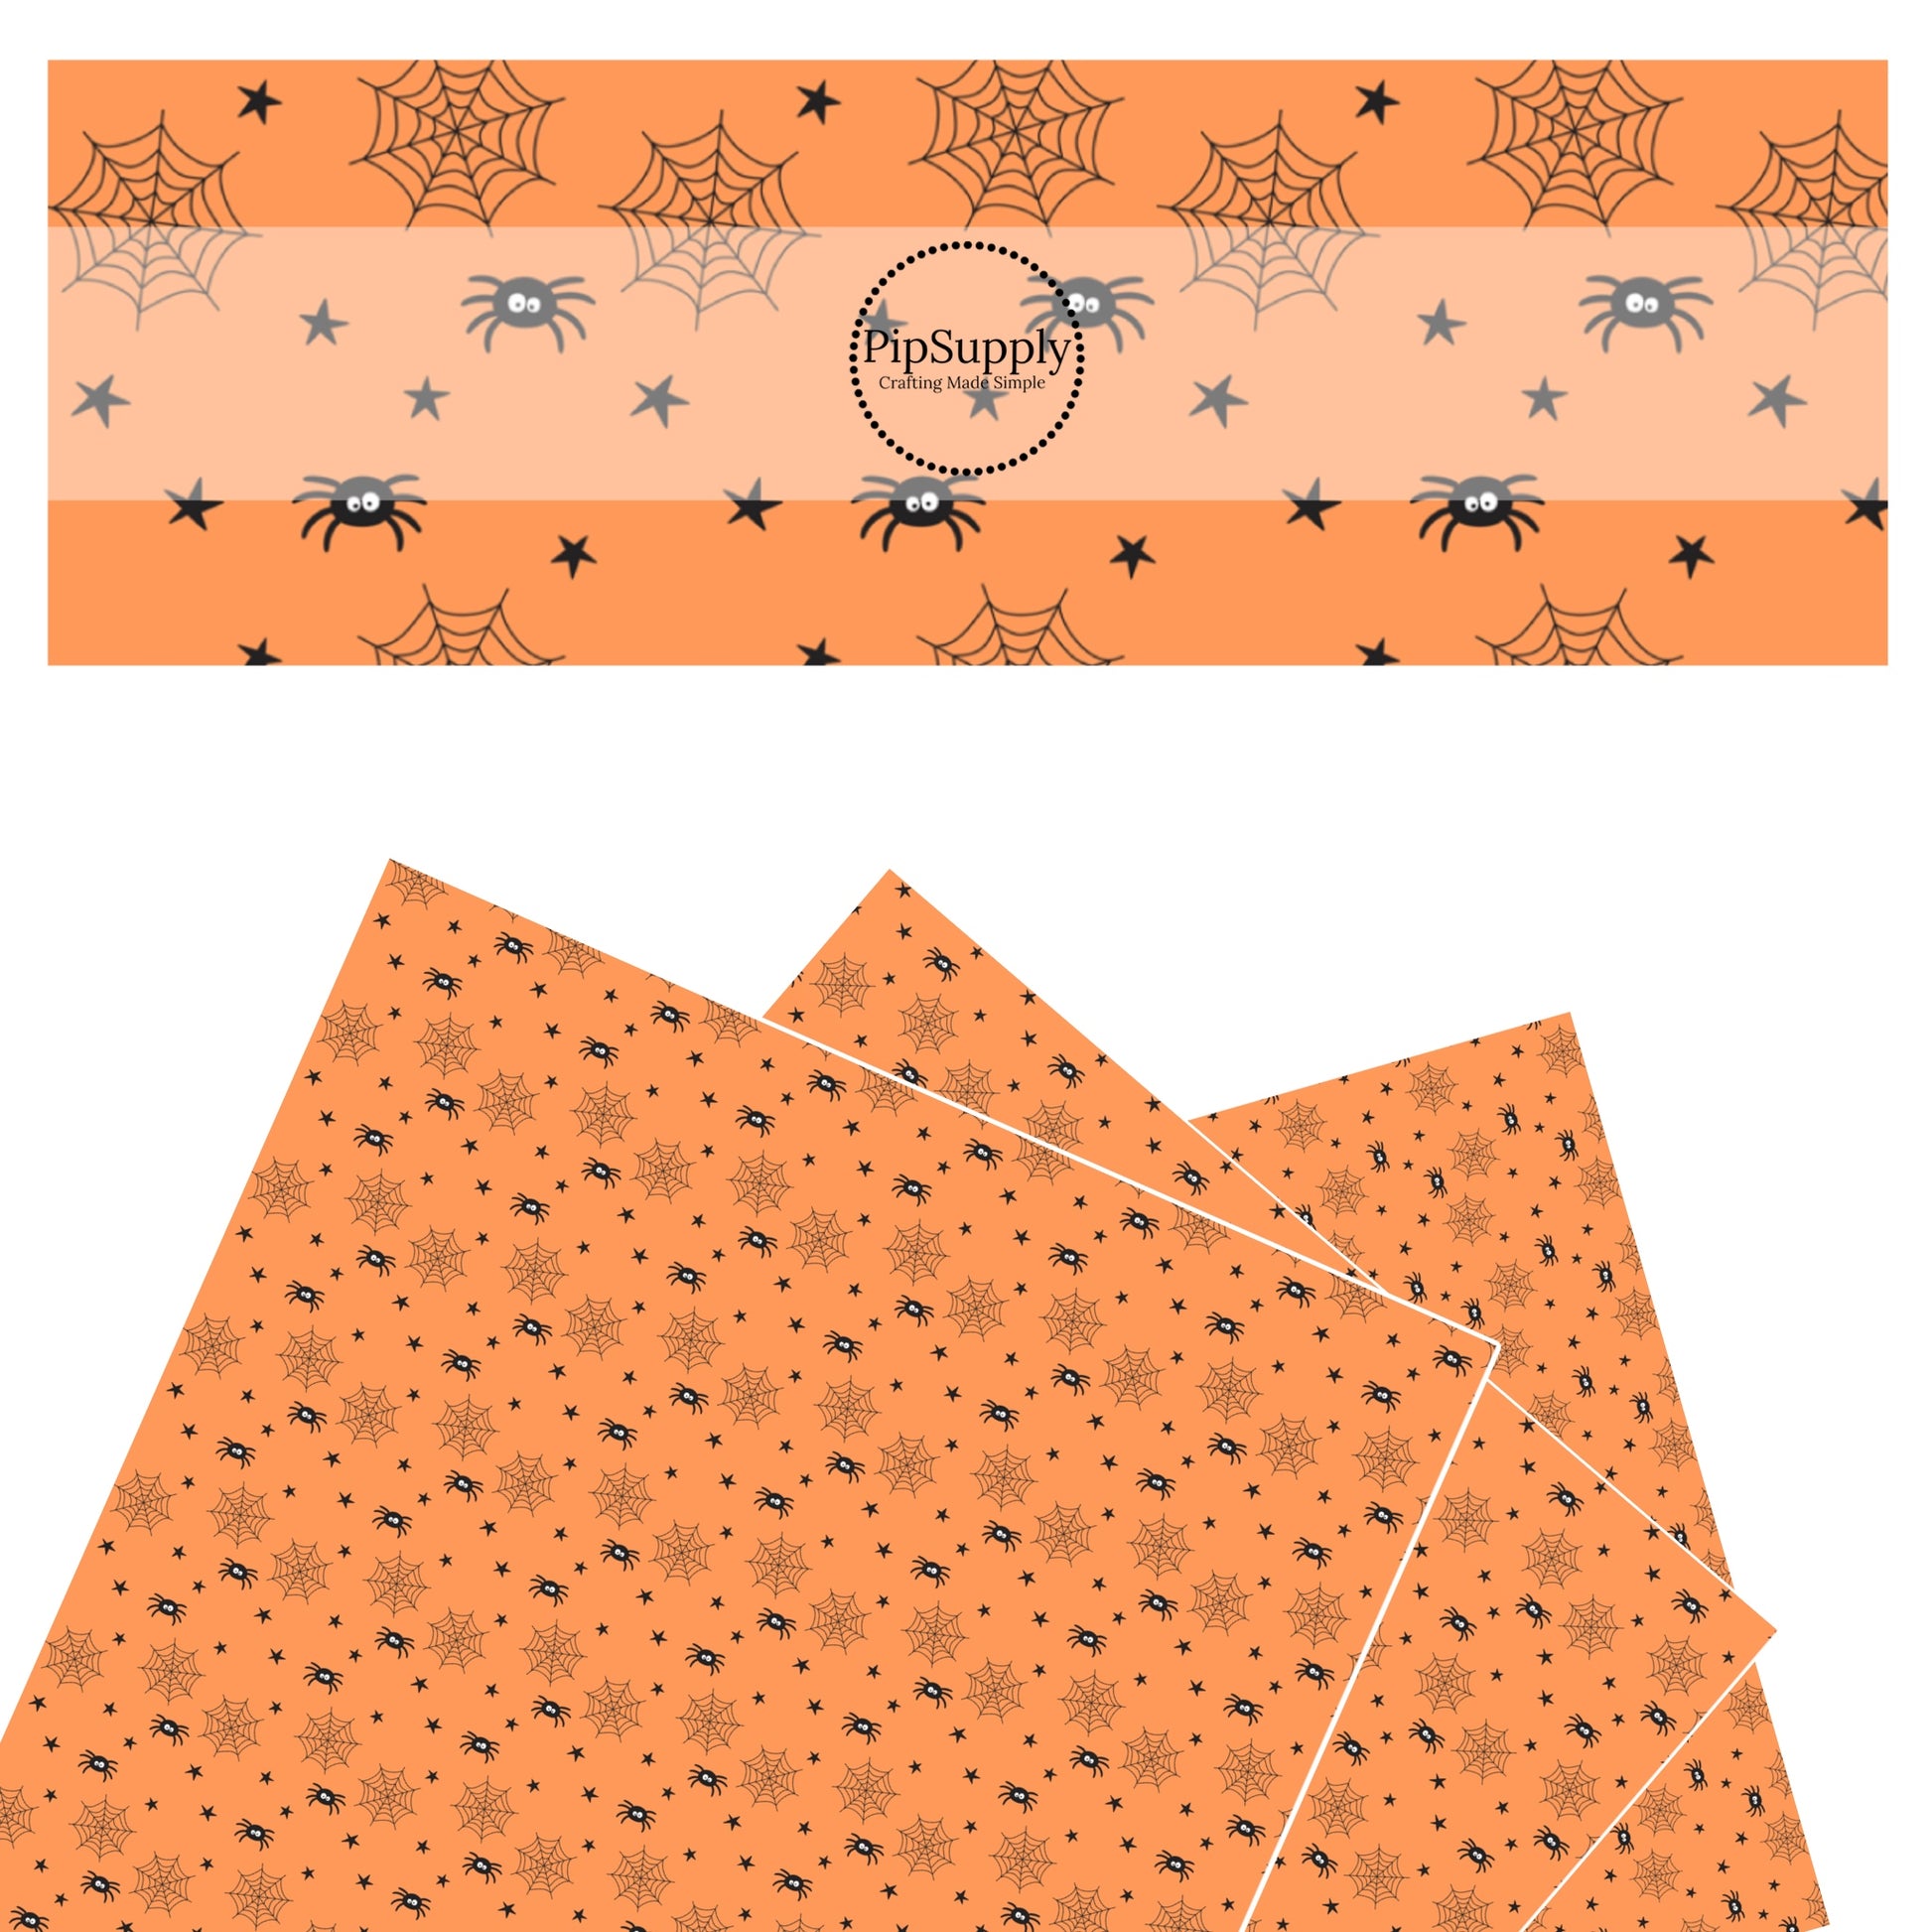 Spiders, webs, and stars on orange faux leather sheets